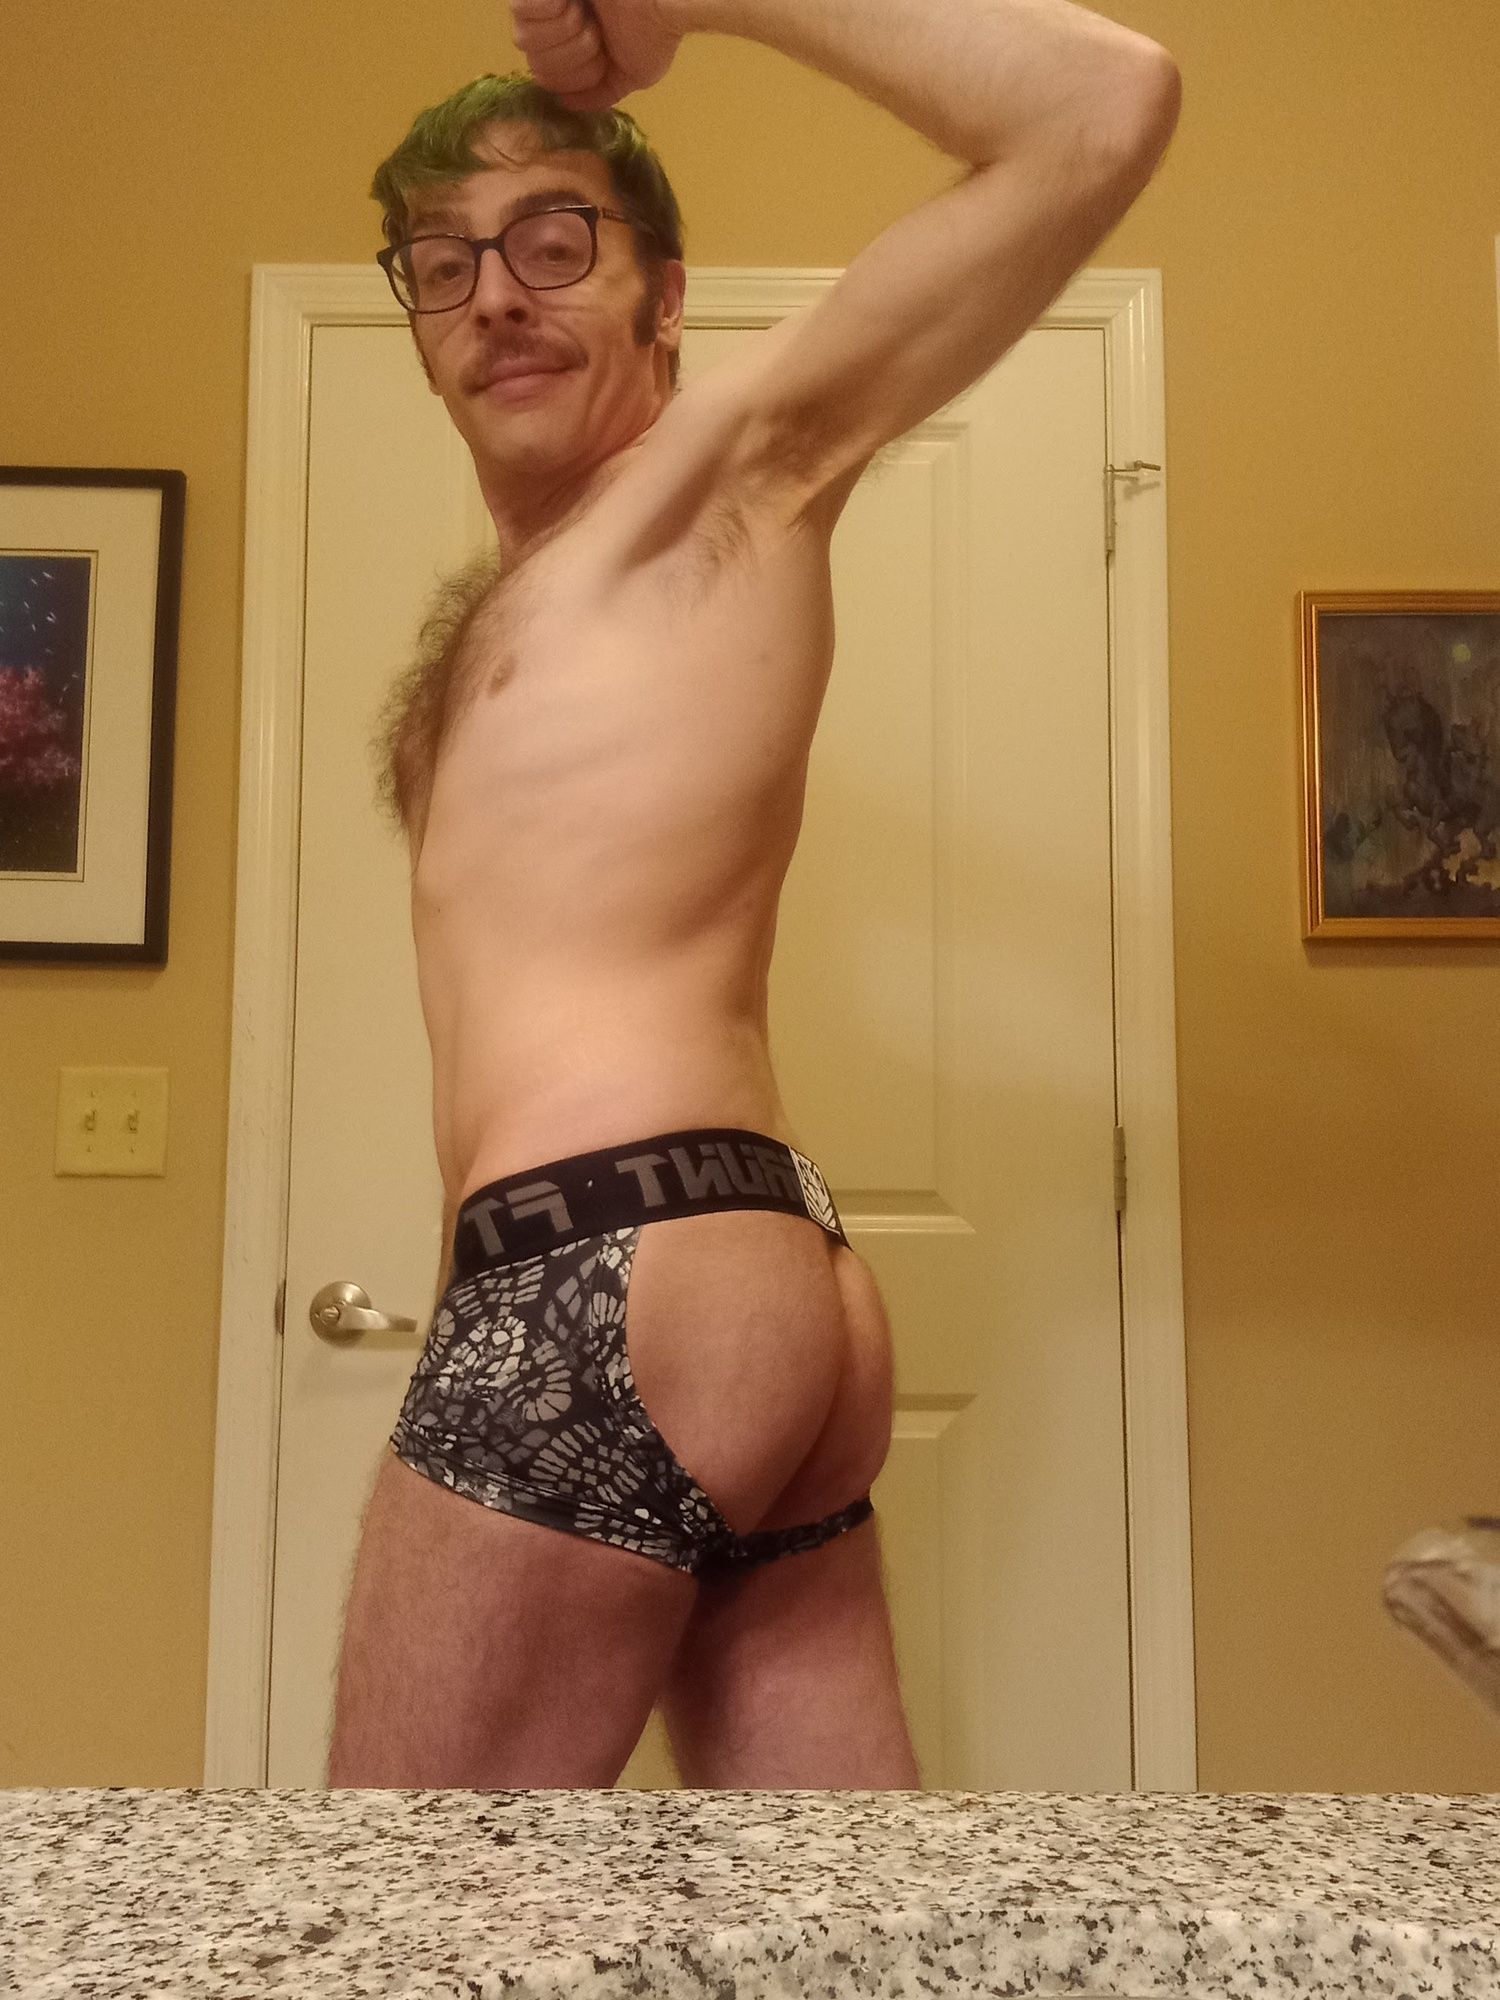 Puppers Showing off in underwear...again #50